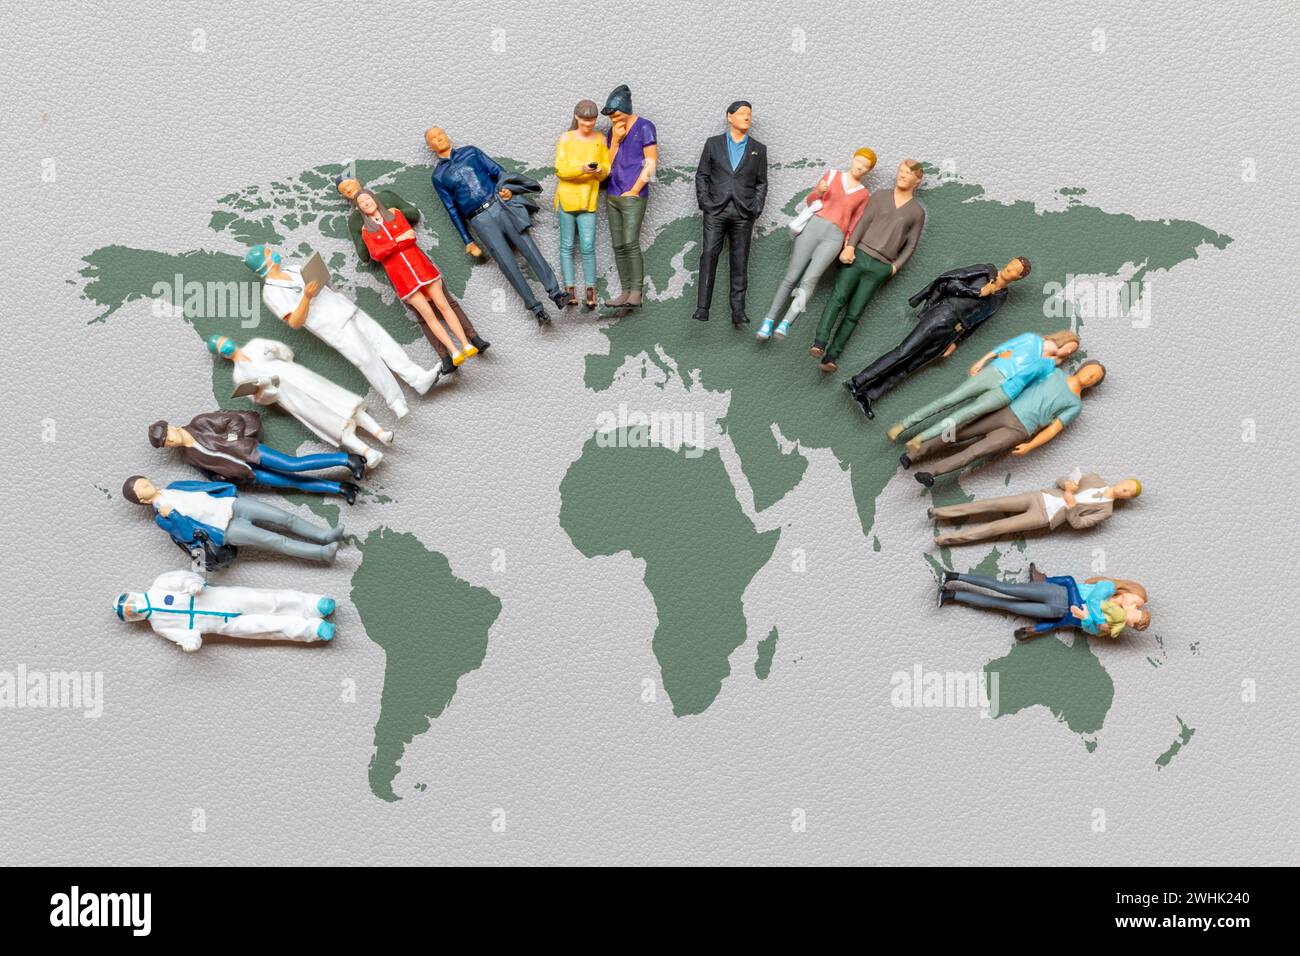 Miniature people standing on the world map with gray background Stock Photo